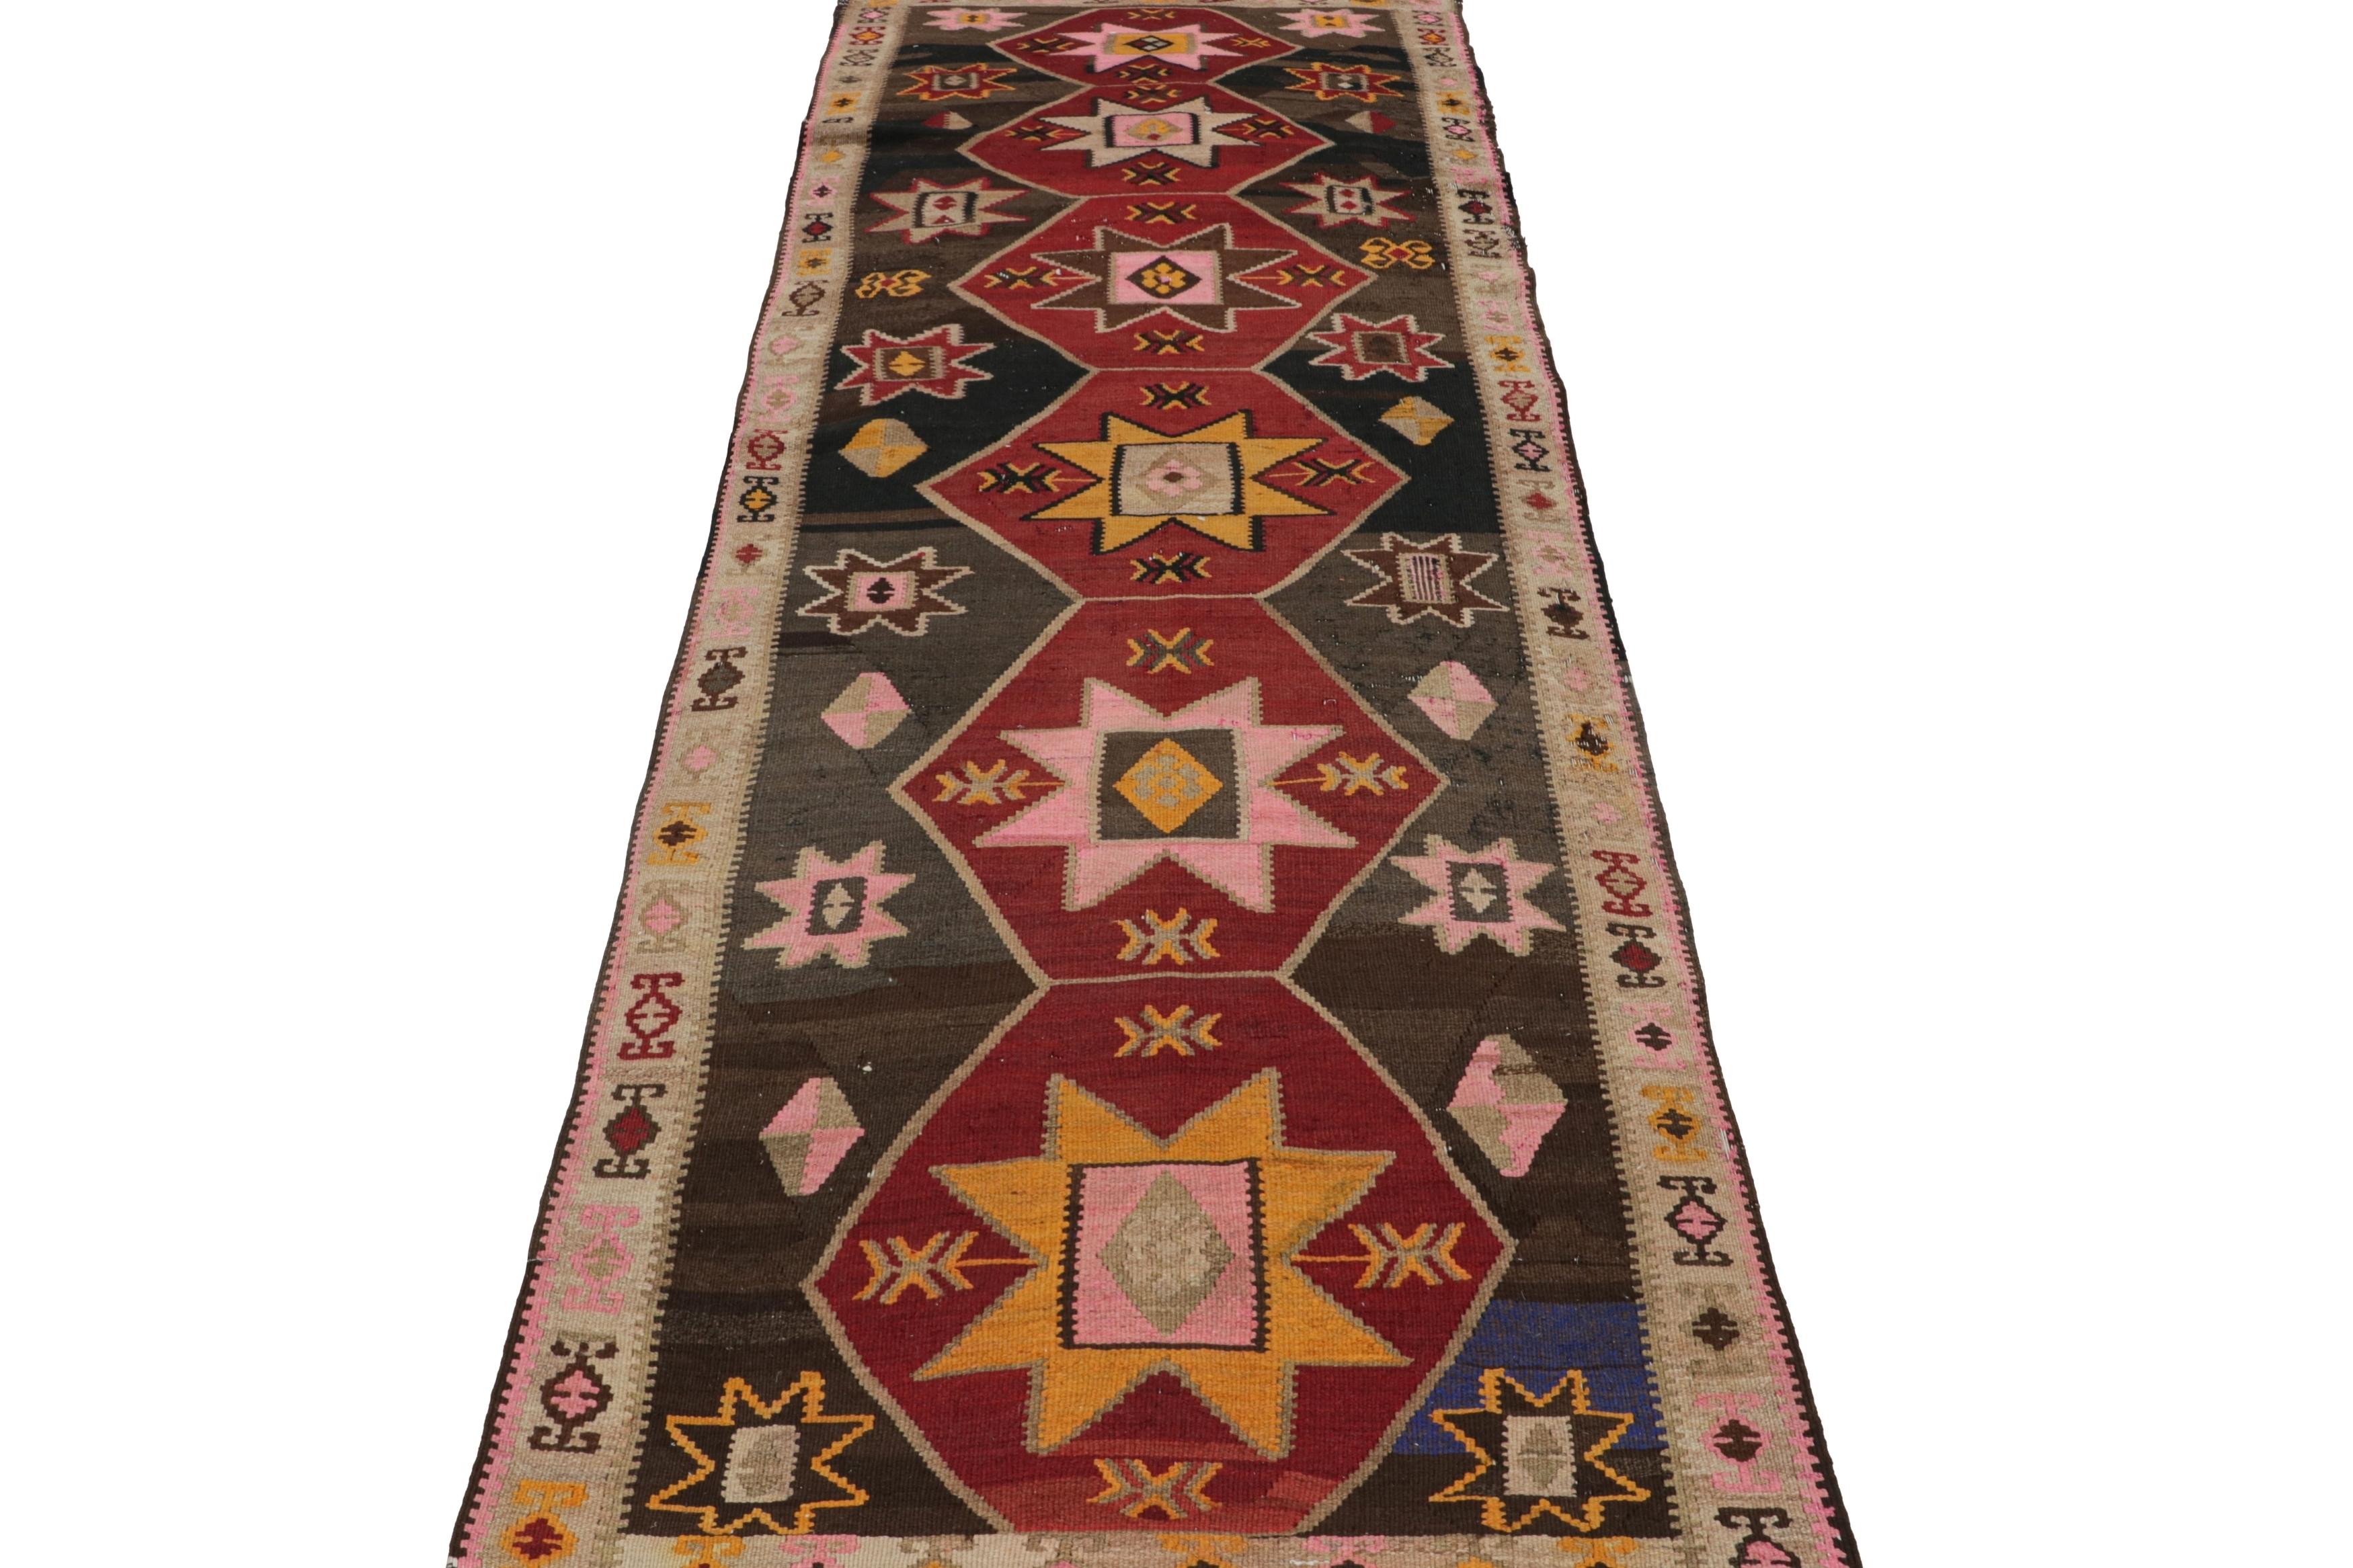 Handwoven Antique Kilim Rug in Beige-Brown Red Medallion Pattern by Rug & Kilim In Good Condition For Sale In Long Island City, NY